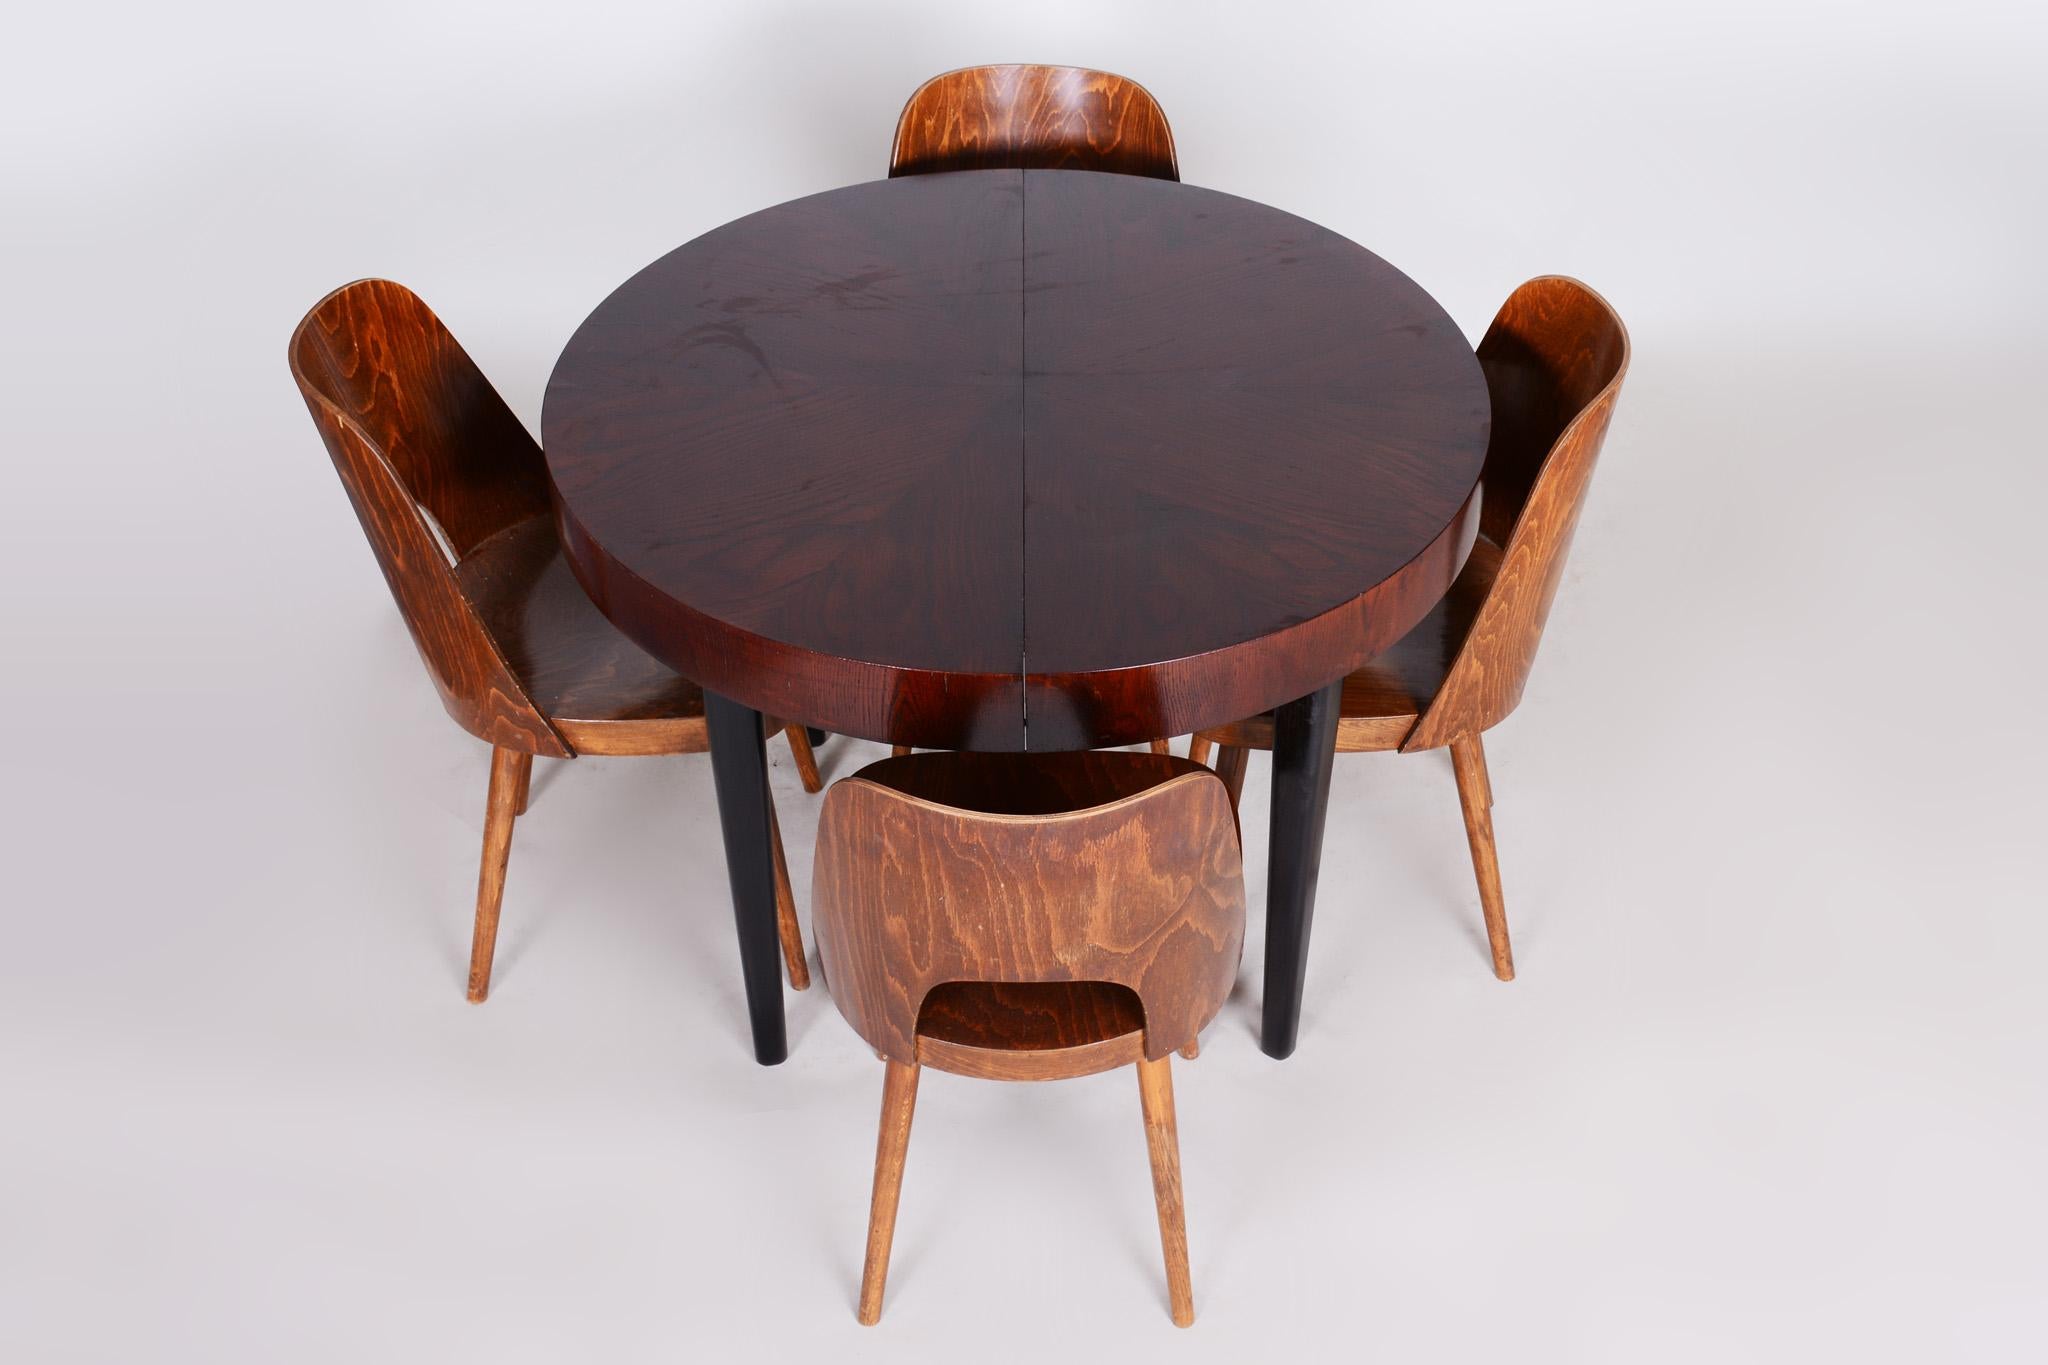 Fully Restored Art Deco Dining Table Made in the 1940s in Czechia, Beech and Oak 6